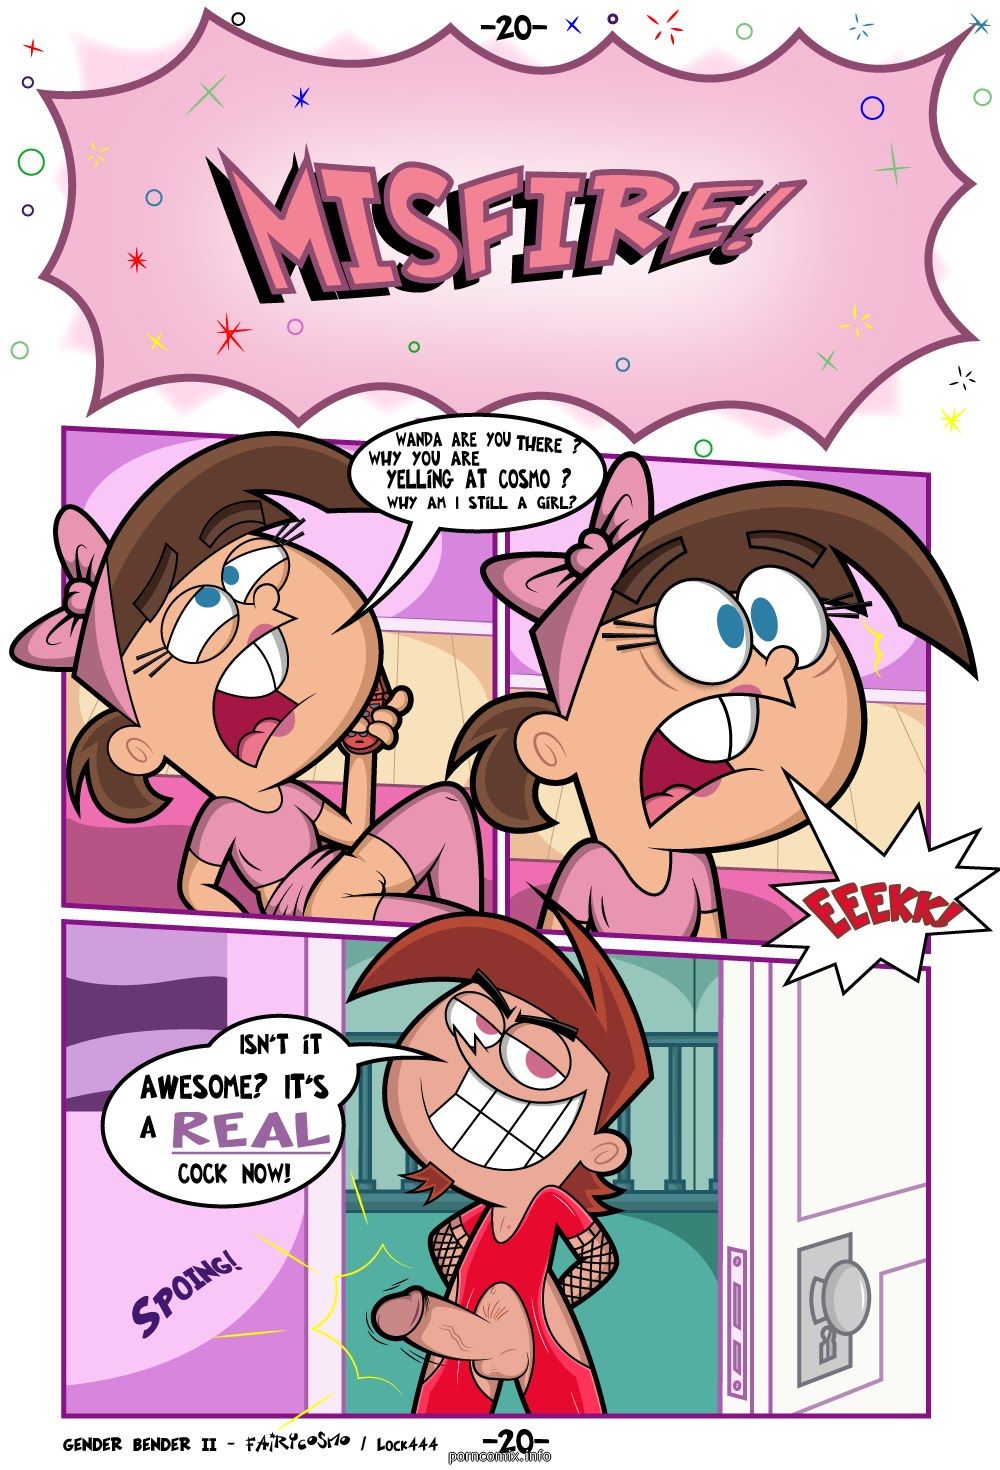 Fairly Odd Parents Reality - Fairly OddParents Gender Bender II [FairyCosmo] Page 21 - Free Porn Comics